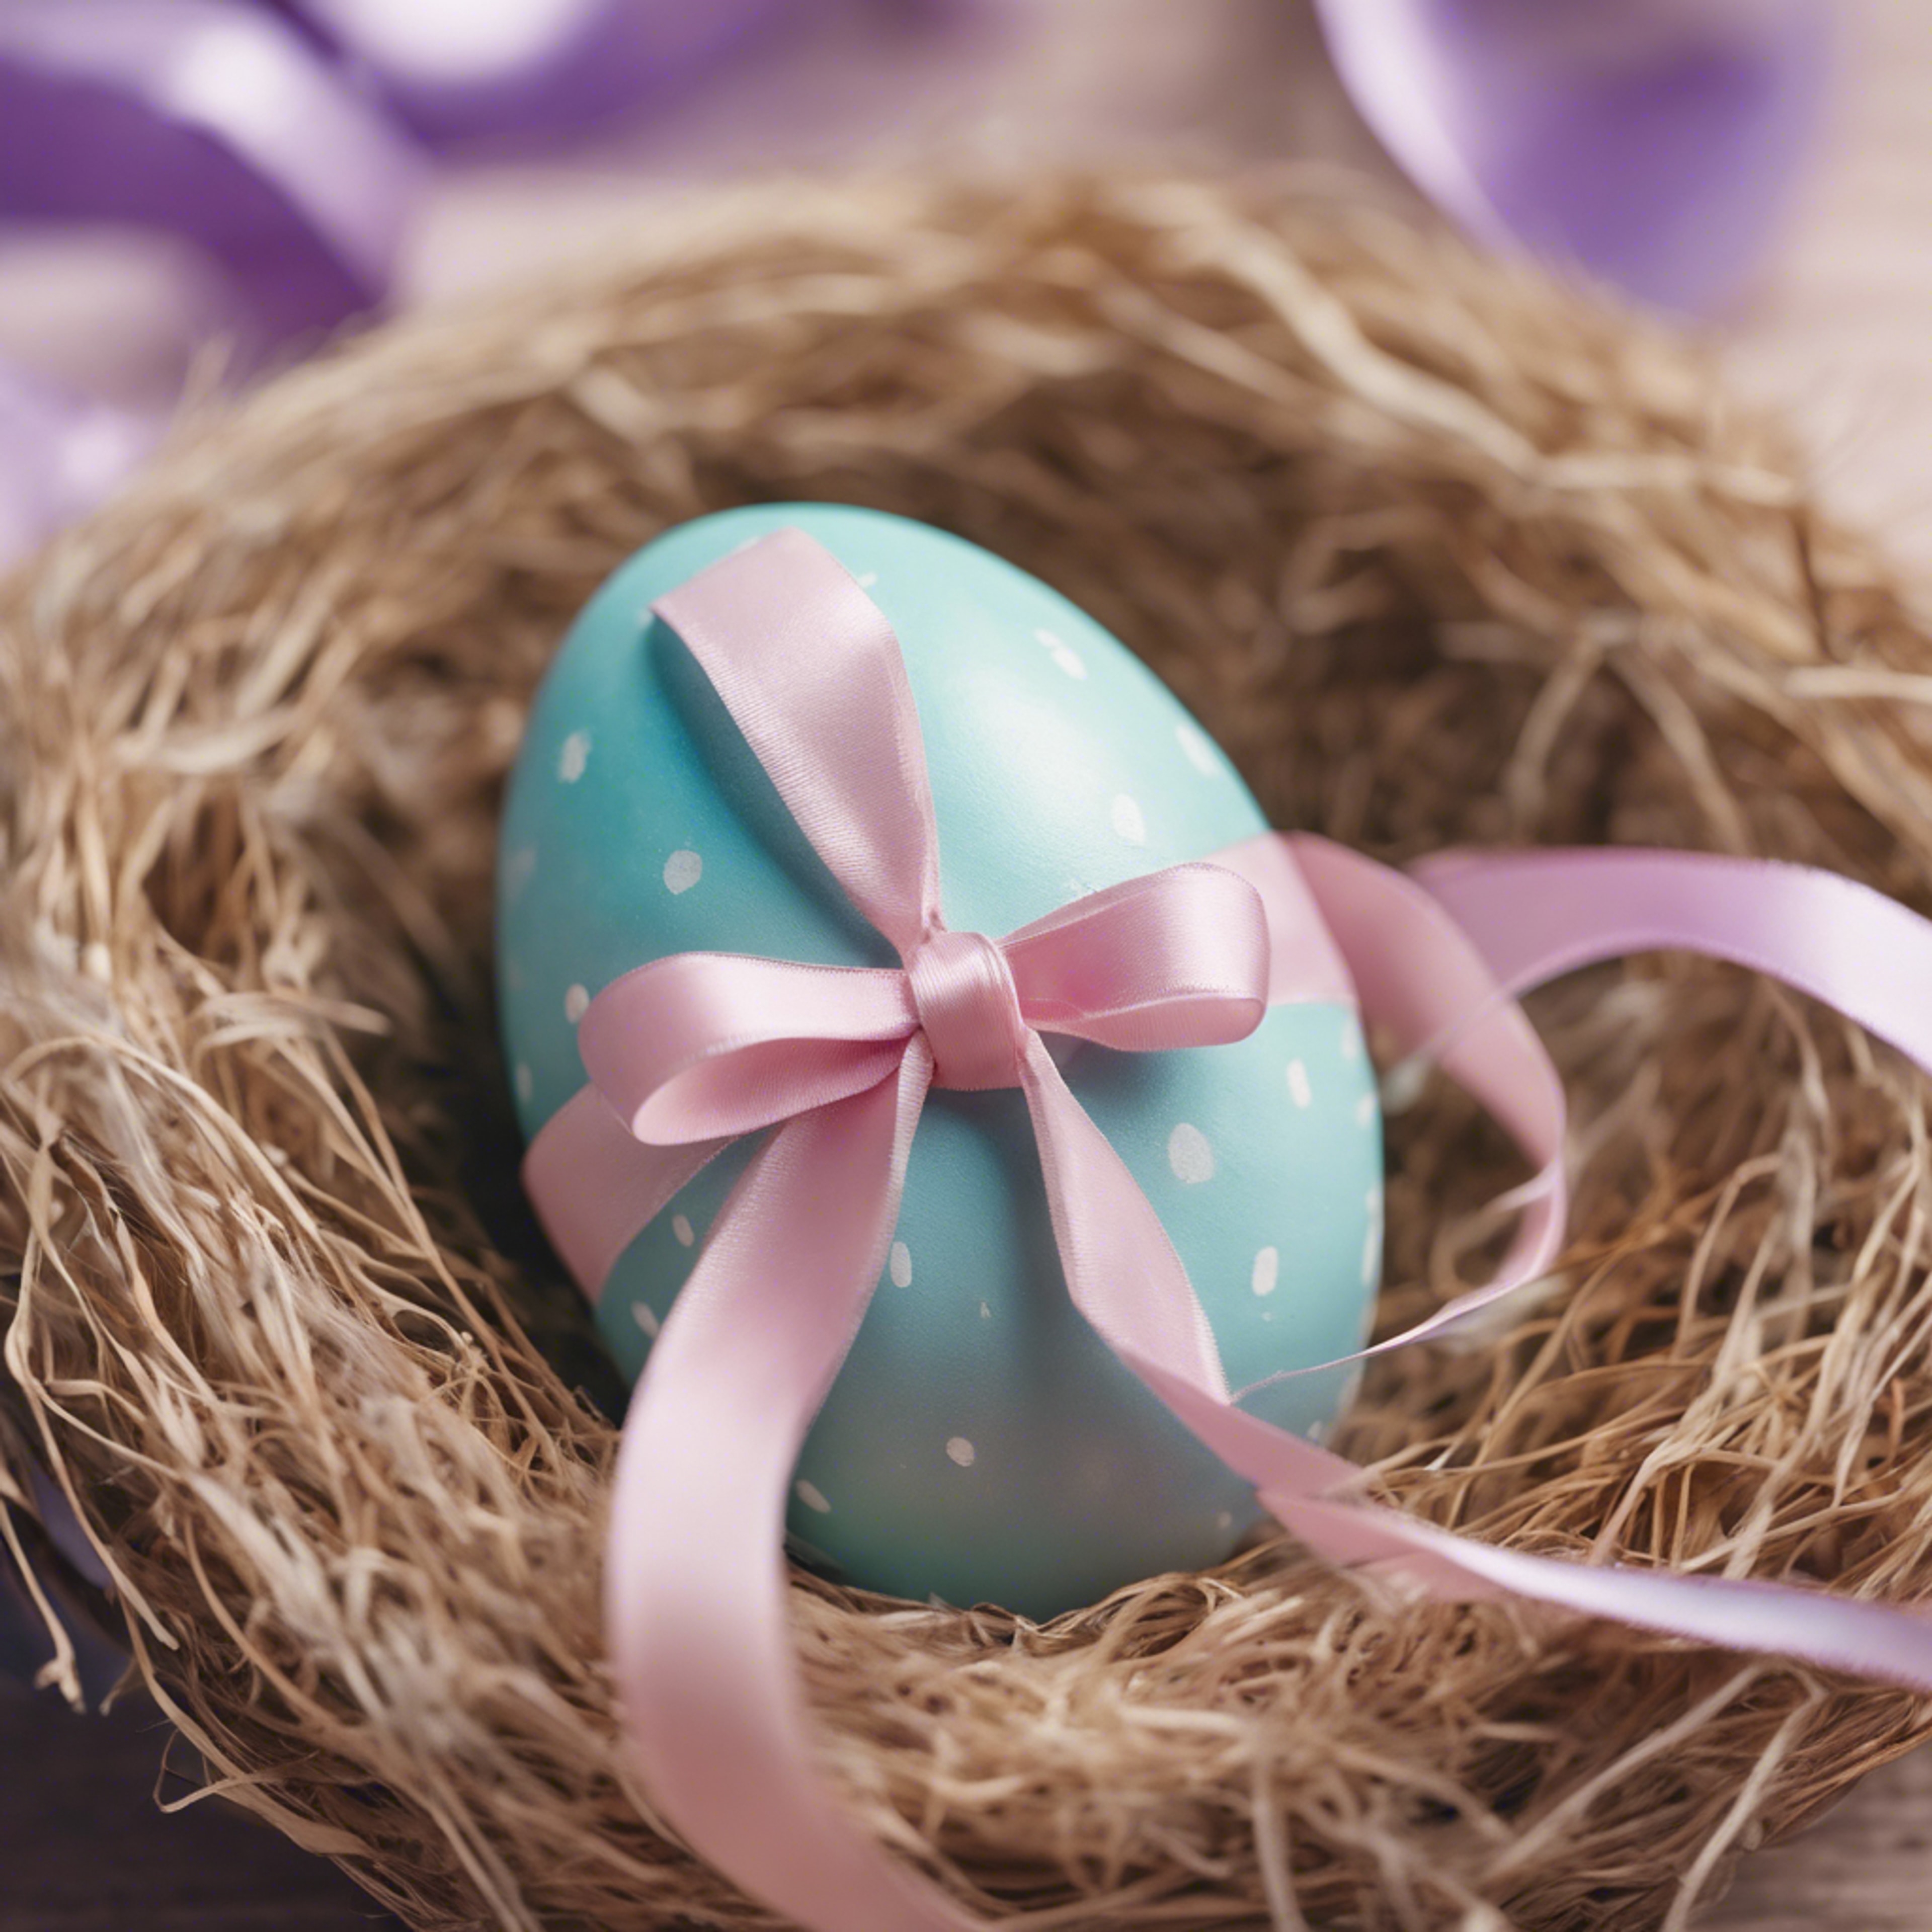 Close-up image of a pastel-colored Easter egg with ribbon details, on a nest. Tapeet[582f95aee8b94a49b4e5]